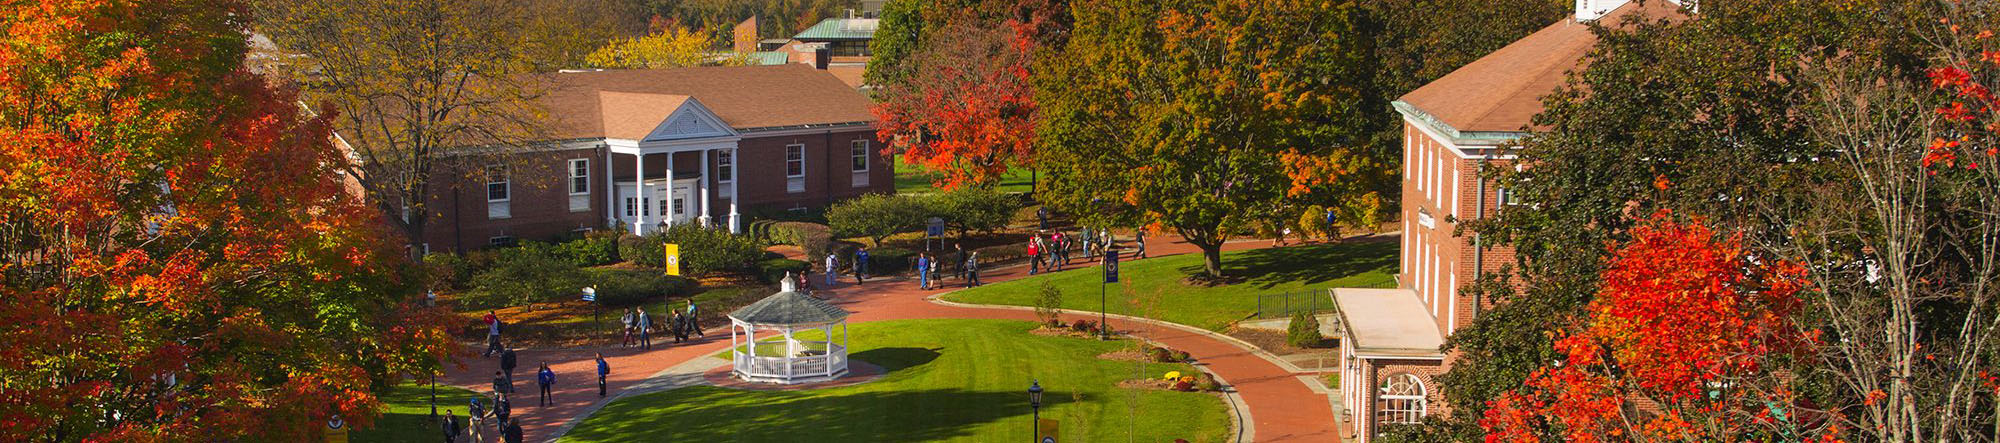 Beautiful Fall Day on Campus